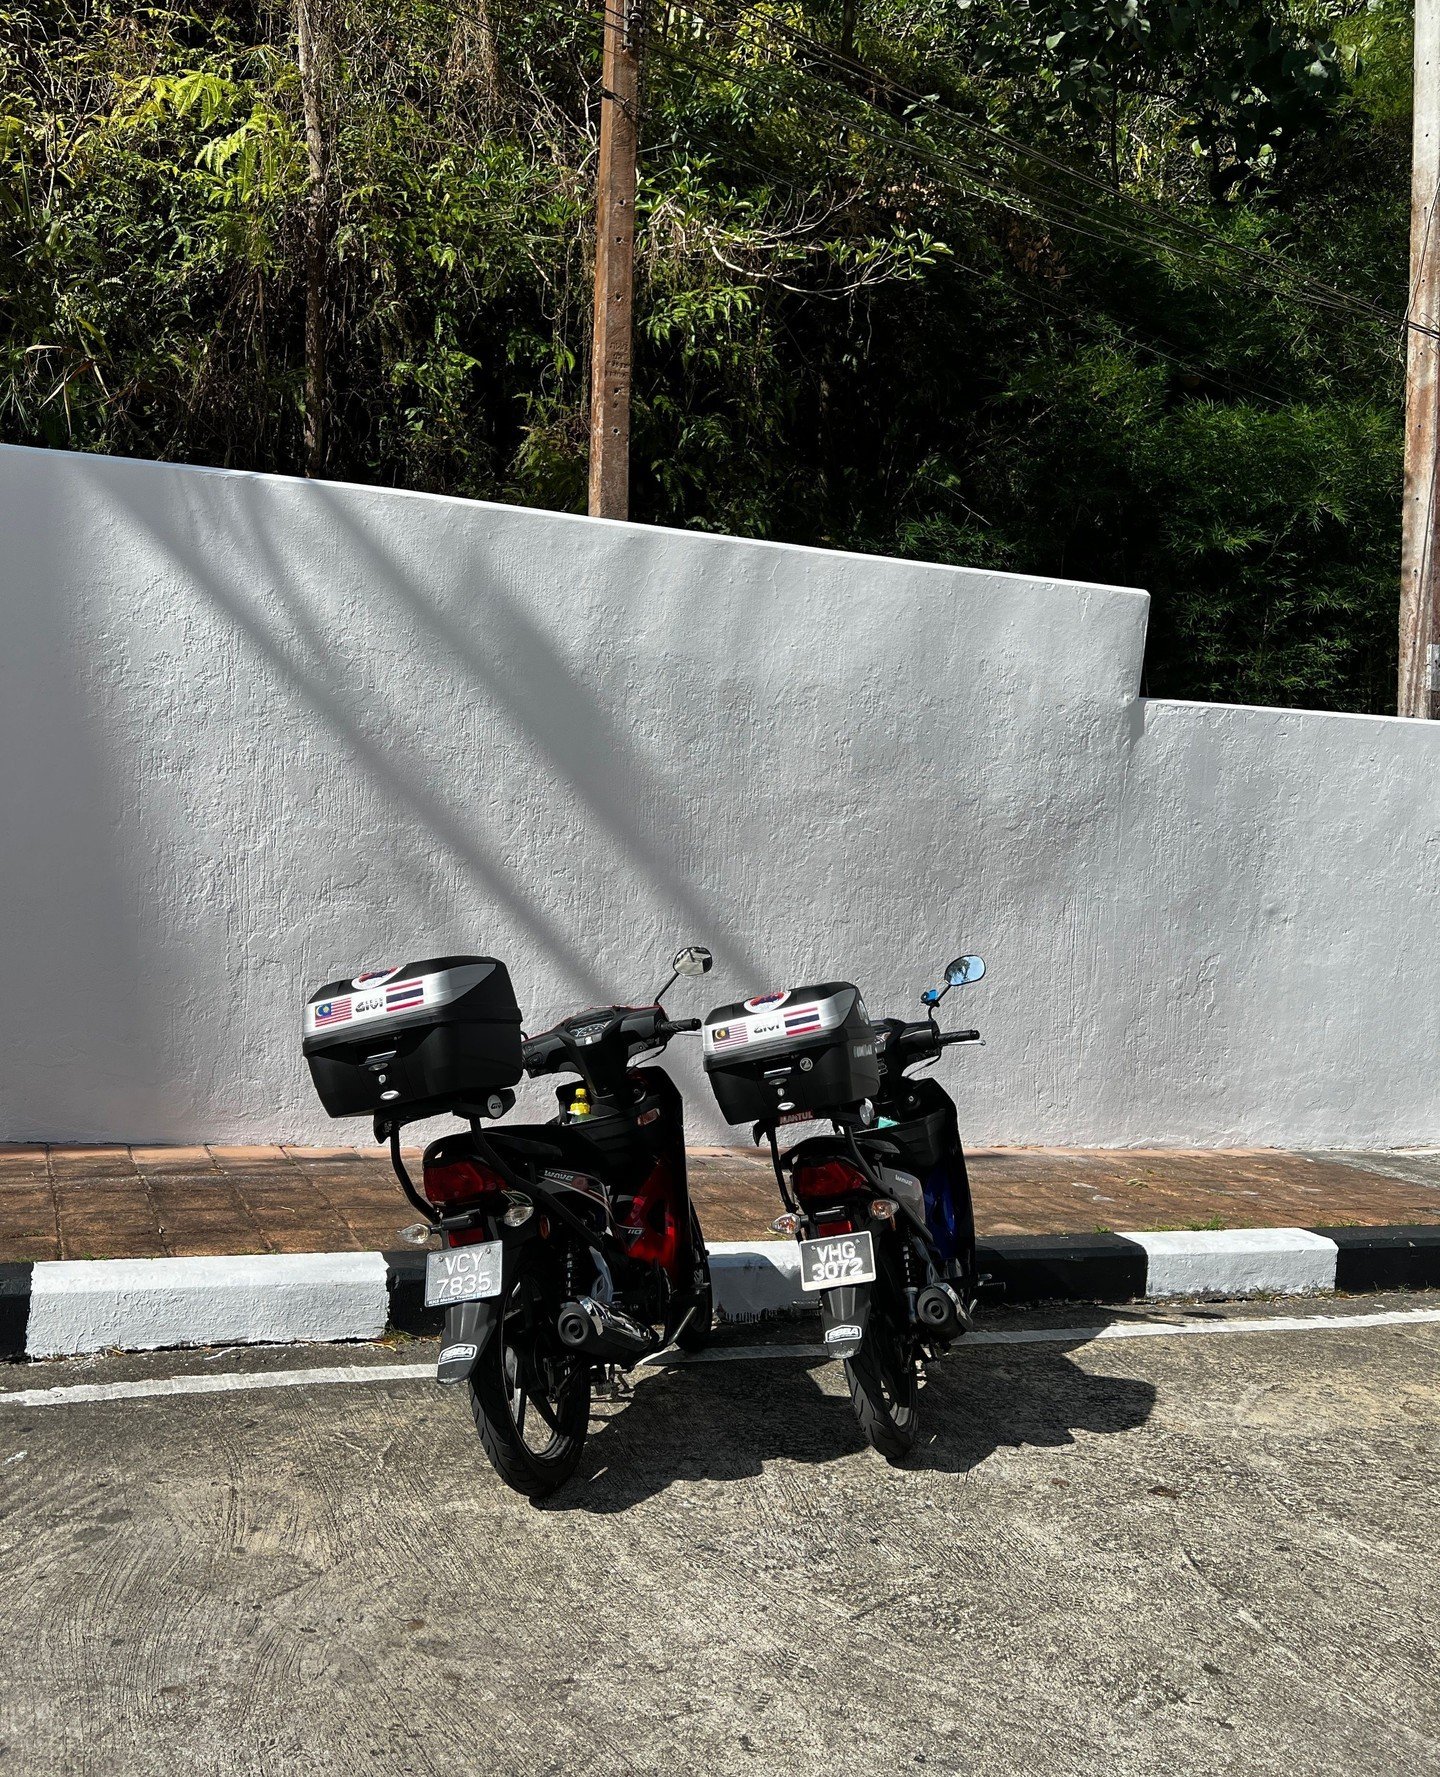 Waiting patiently at the border. ⁠
⁠
- Small Bike Stuff